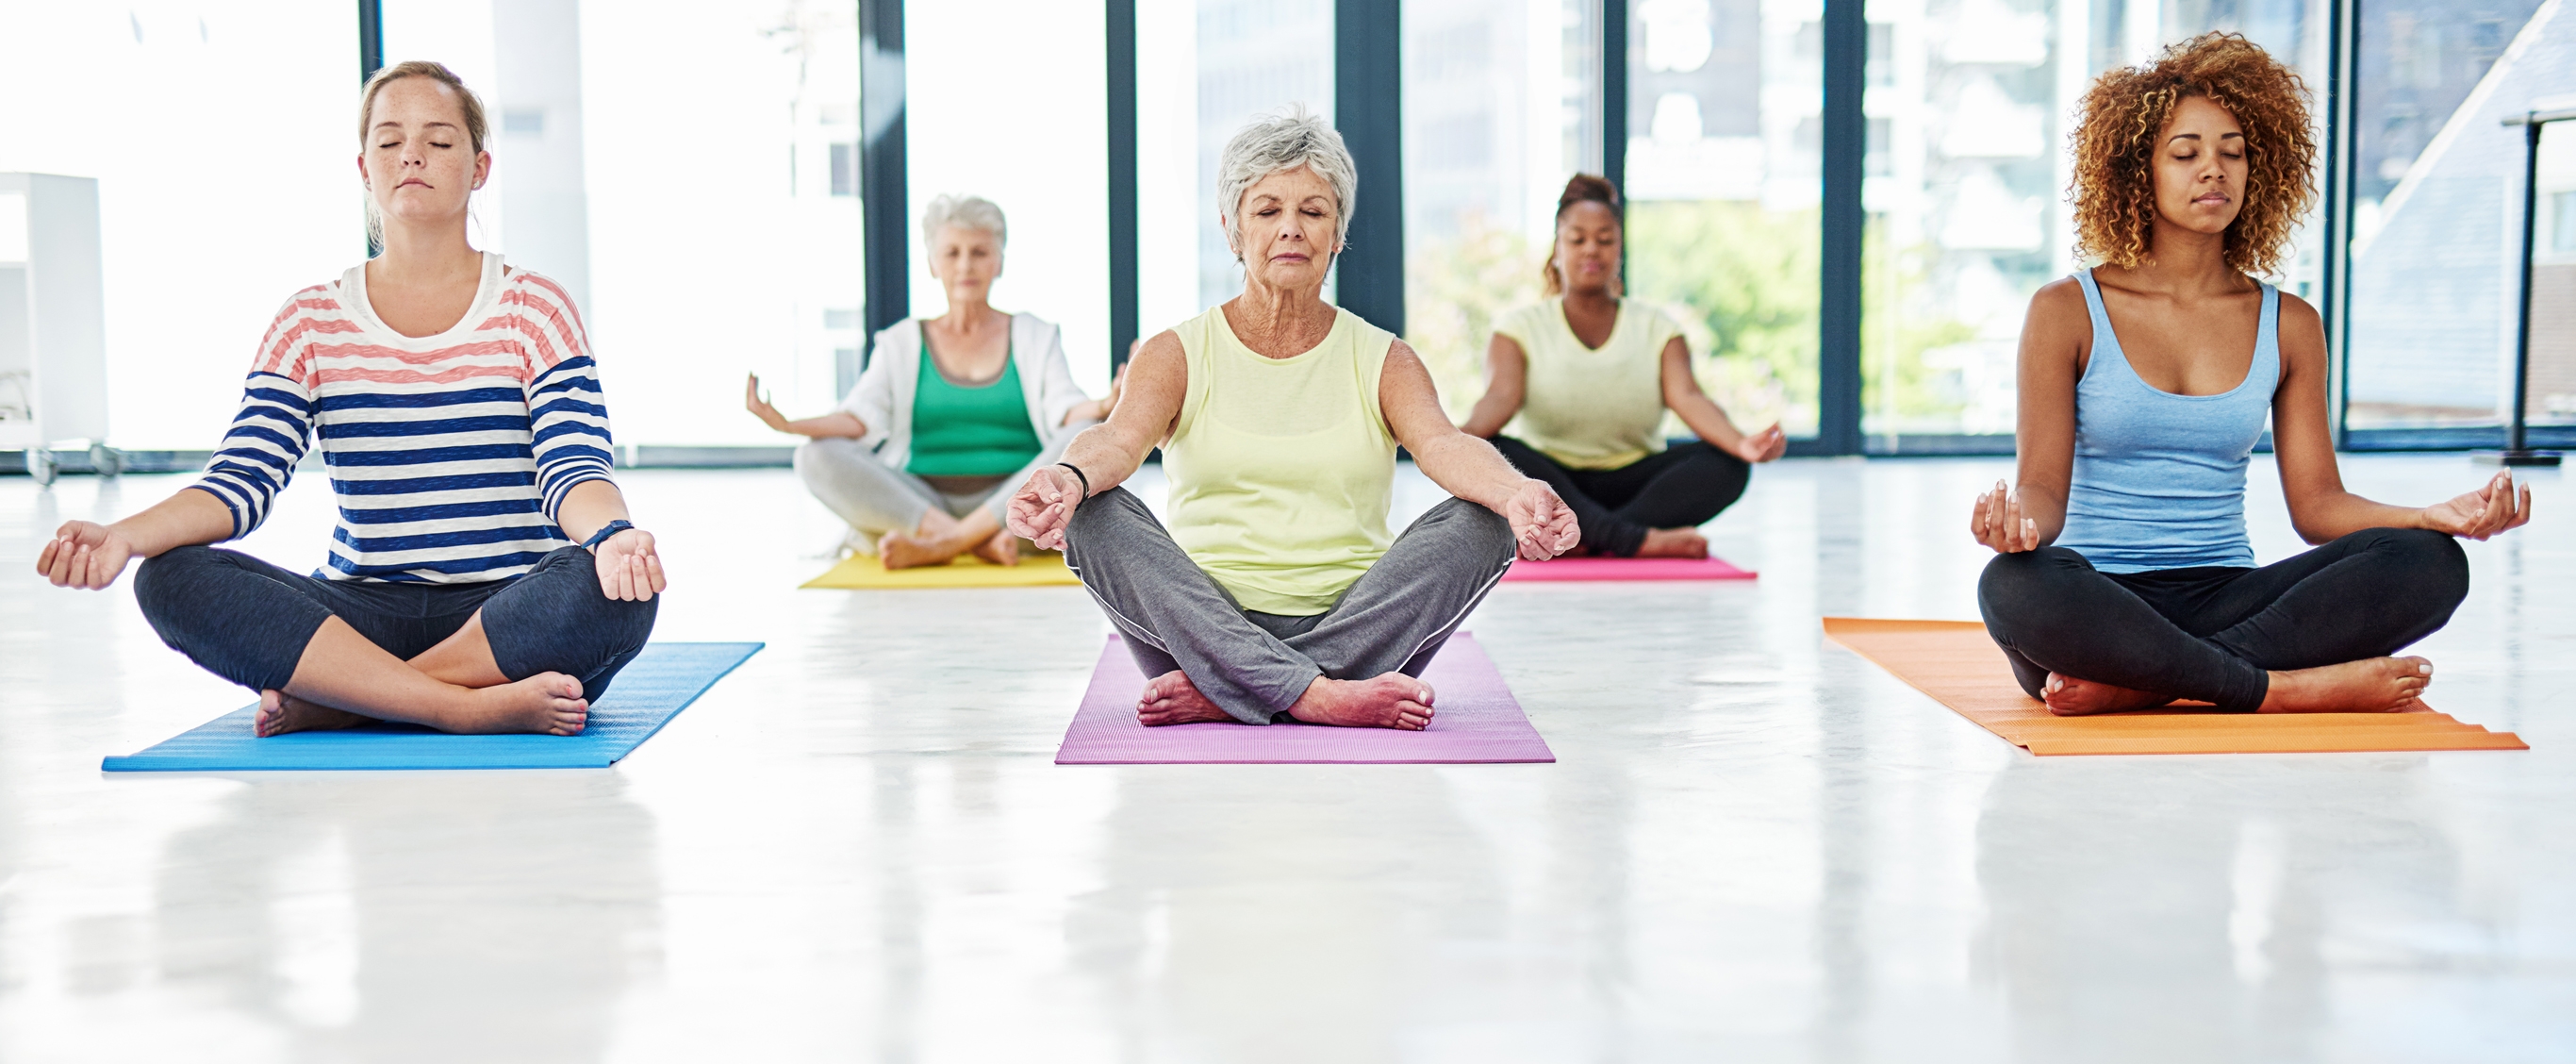 Fitness programs for older adults